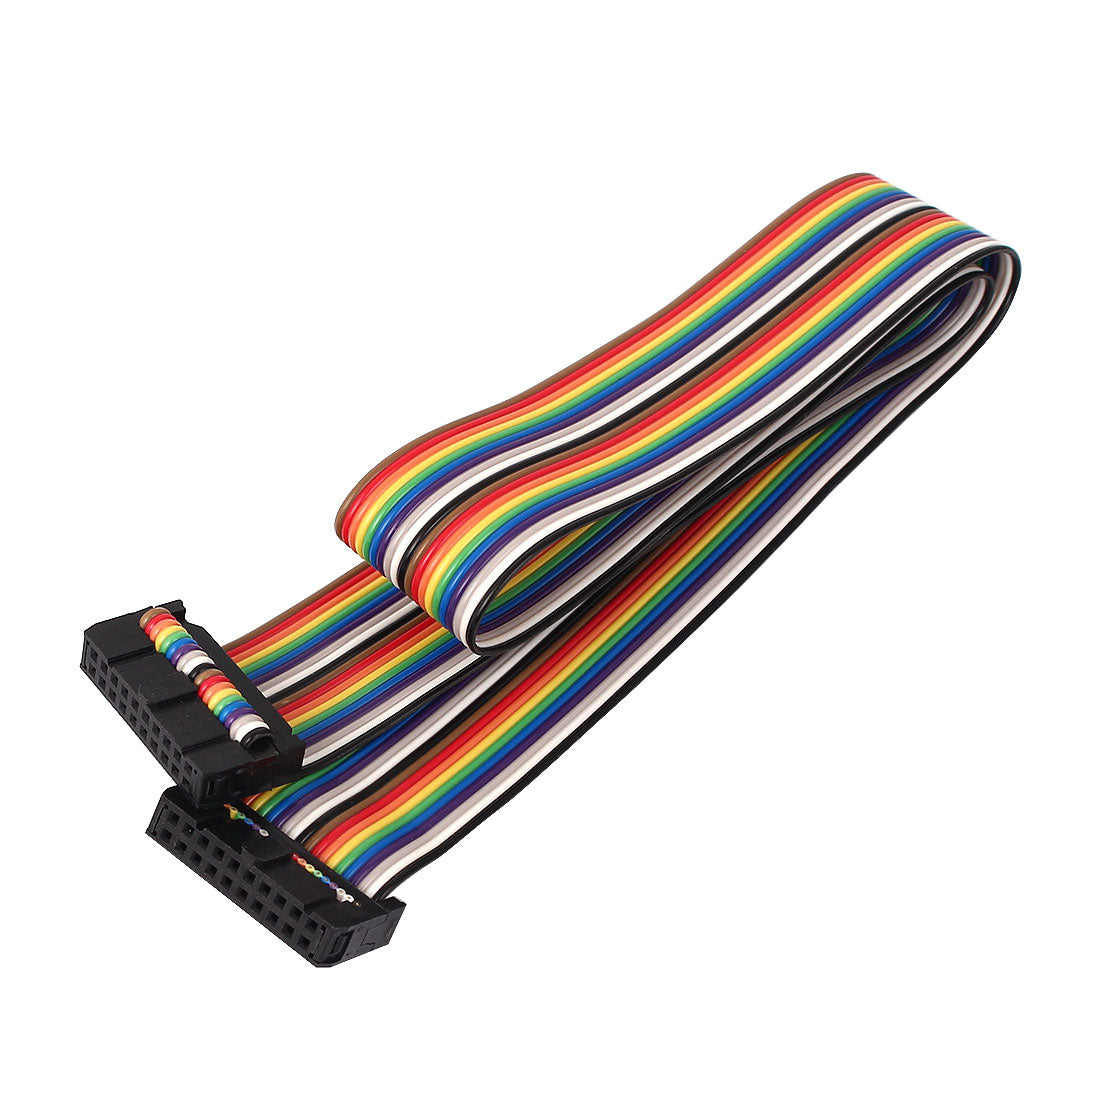 Uxcell Uxcell 50cm 20 Pin 20 Way F/F Connector IDC Flat Rainbow Color Ribbon Cable for Arduino DIY 2pcs